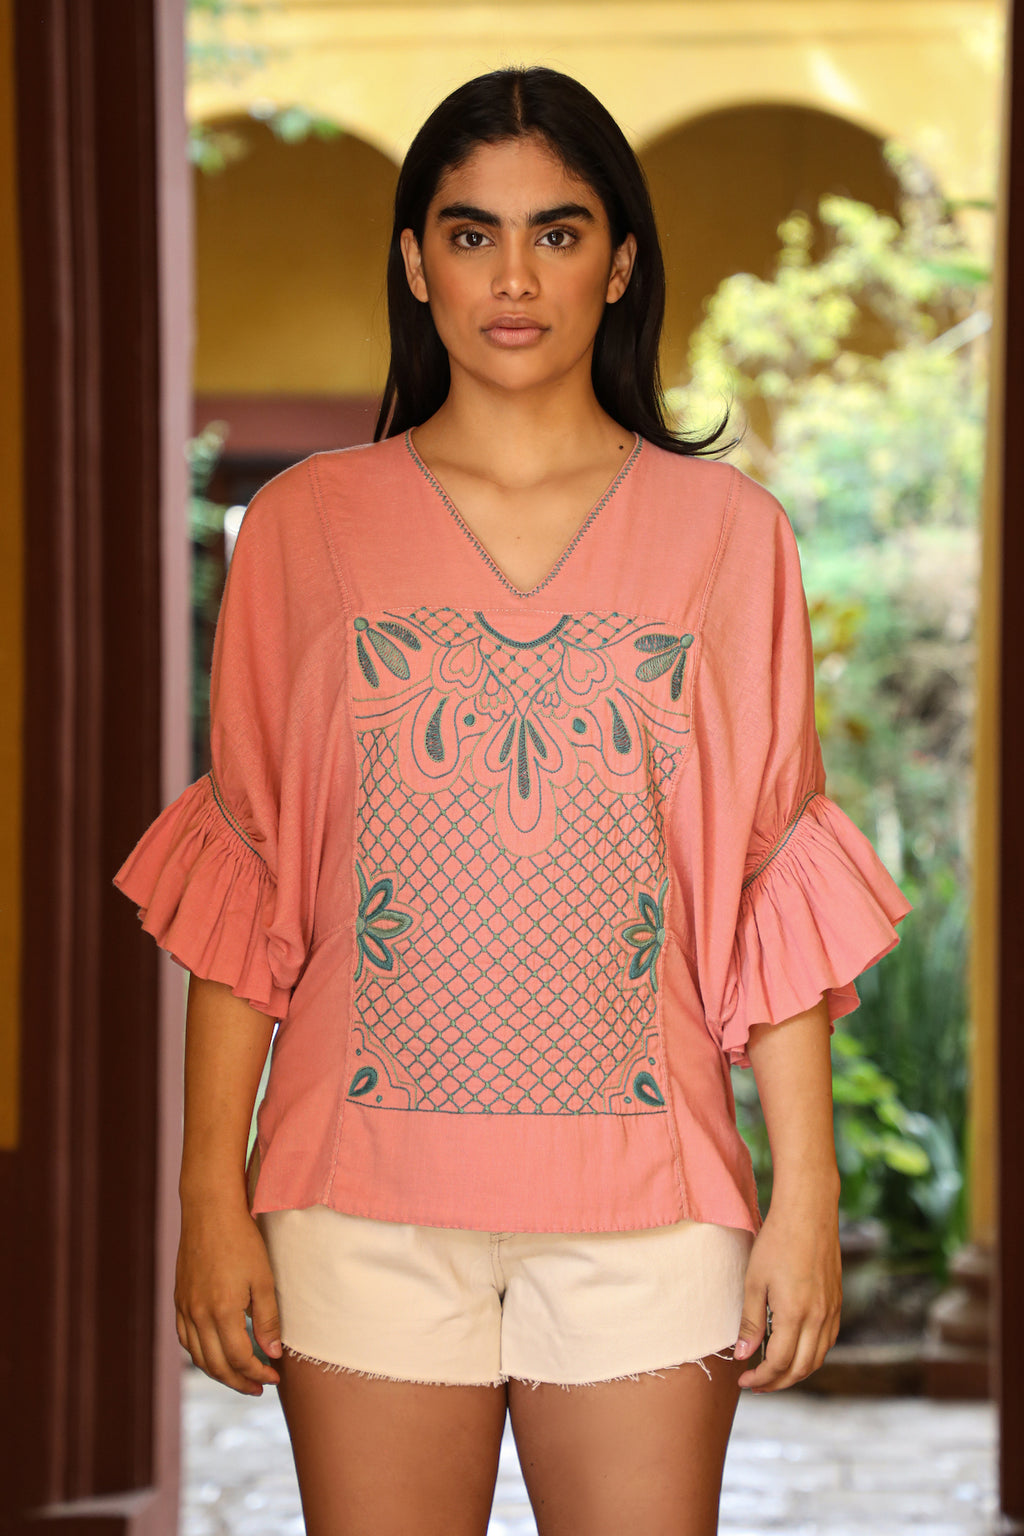 Handmade summer top with extra wide sleeves in pink with embroidery in green